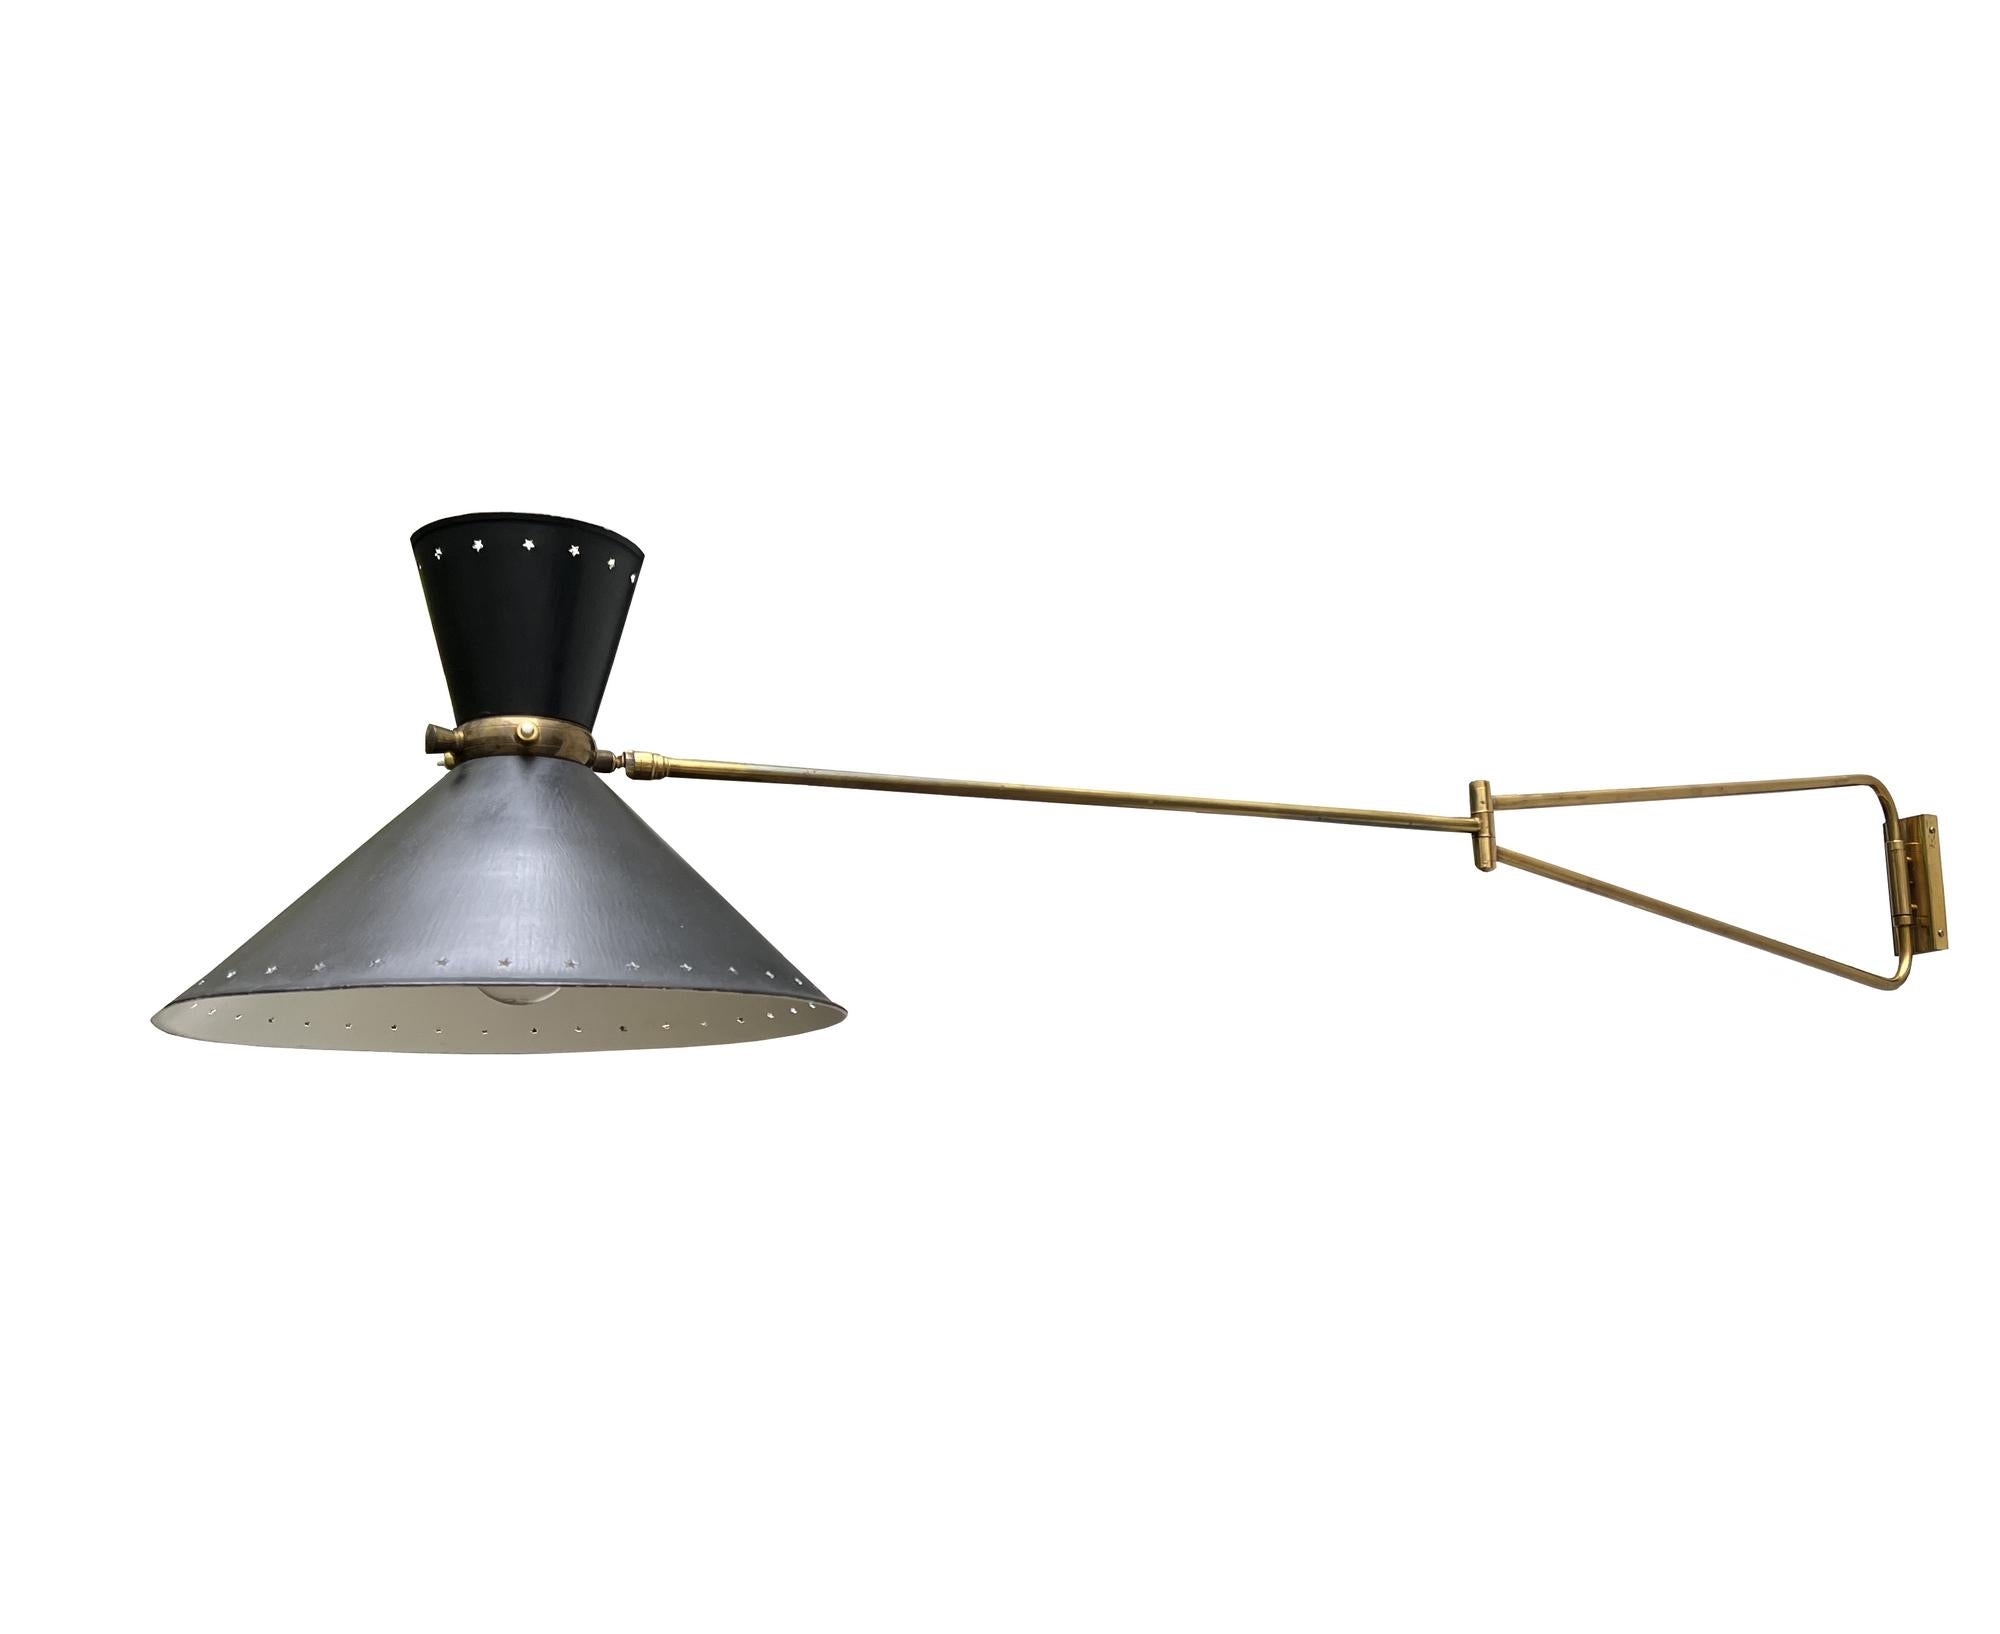 Large wall light by Robert Mathieu, France, circa 1950.
Black lacquered metal and brass, original shade in lacquered black and off white metal.
With two articulations at 360° and a patella above the lampshade.

Measures:
Maximum length: 56.3 in (